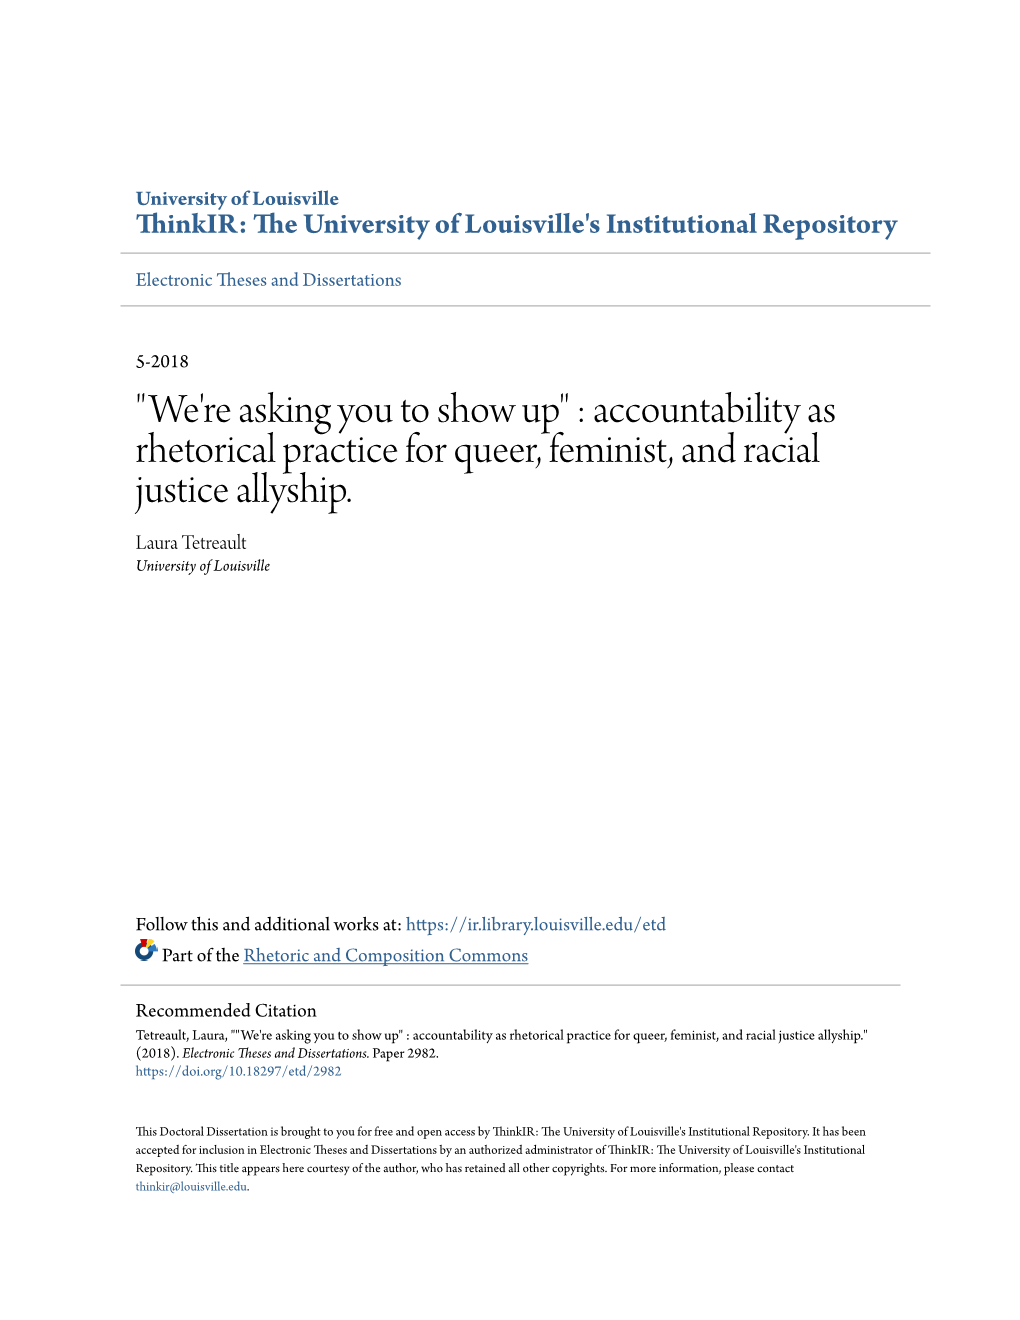 Accountability As Rhetorical Practice for Queer, Feminist, and Racial Justice Allyship